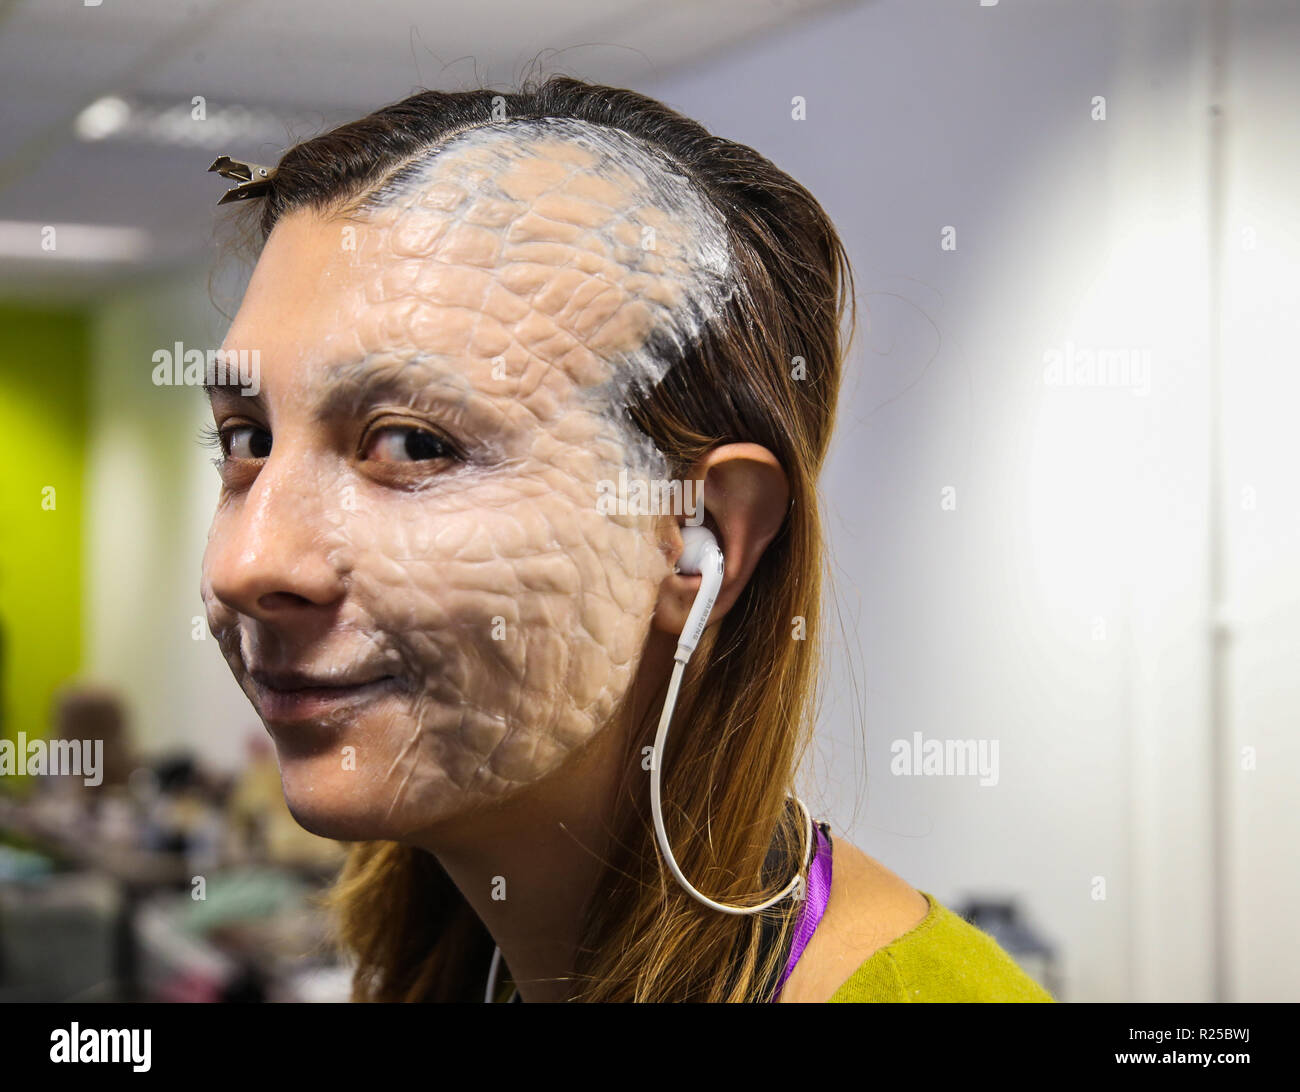 Birmingham,Midlands ,UK 17 November  2018 Birmingham University held the acclaimed The Prosthetic Event 2018 an event for those passionate about prosthetic,special defects ,Make up ,animations  ,mask ,sculptures ,mould making ,puppets,body painting ,a show with a difference @Paul Quezada-Neiman/Alamy Live News Stock Photo